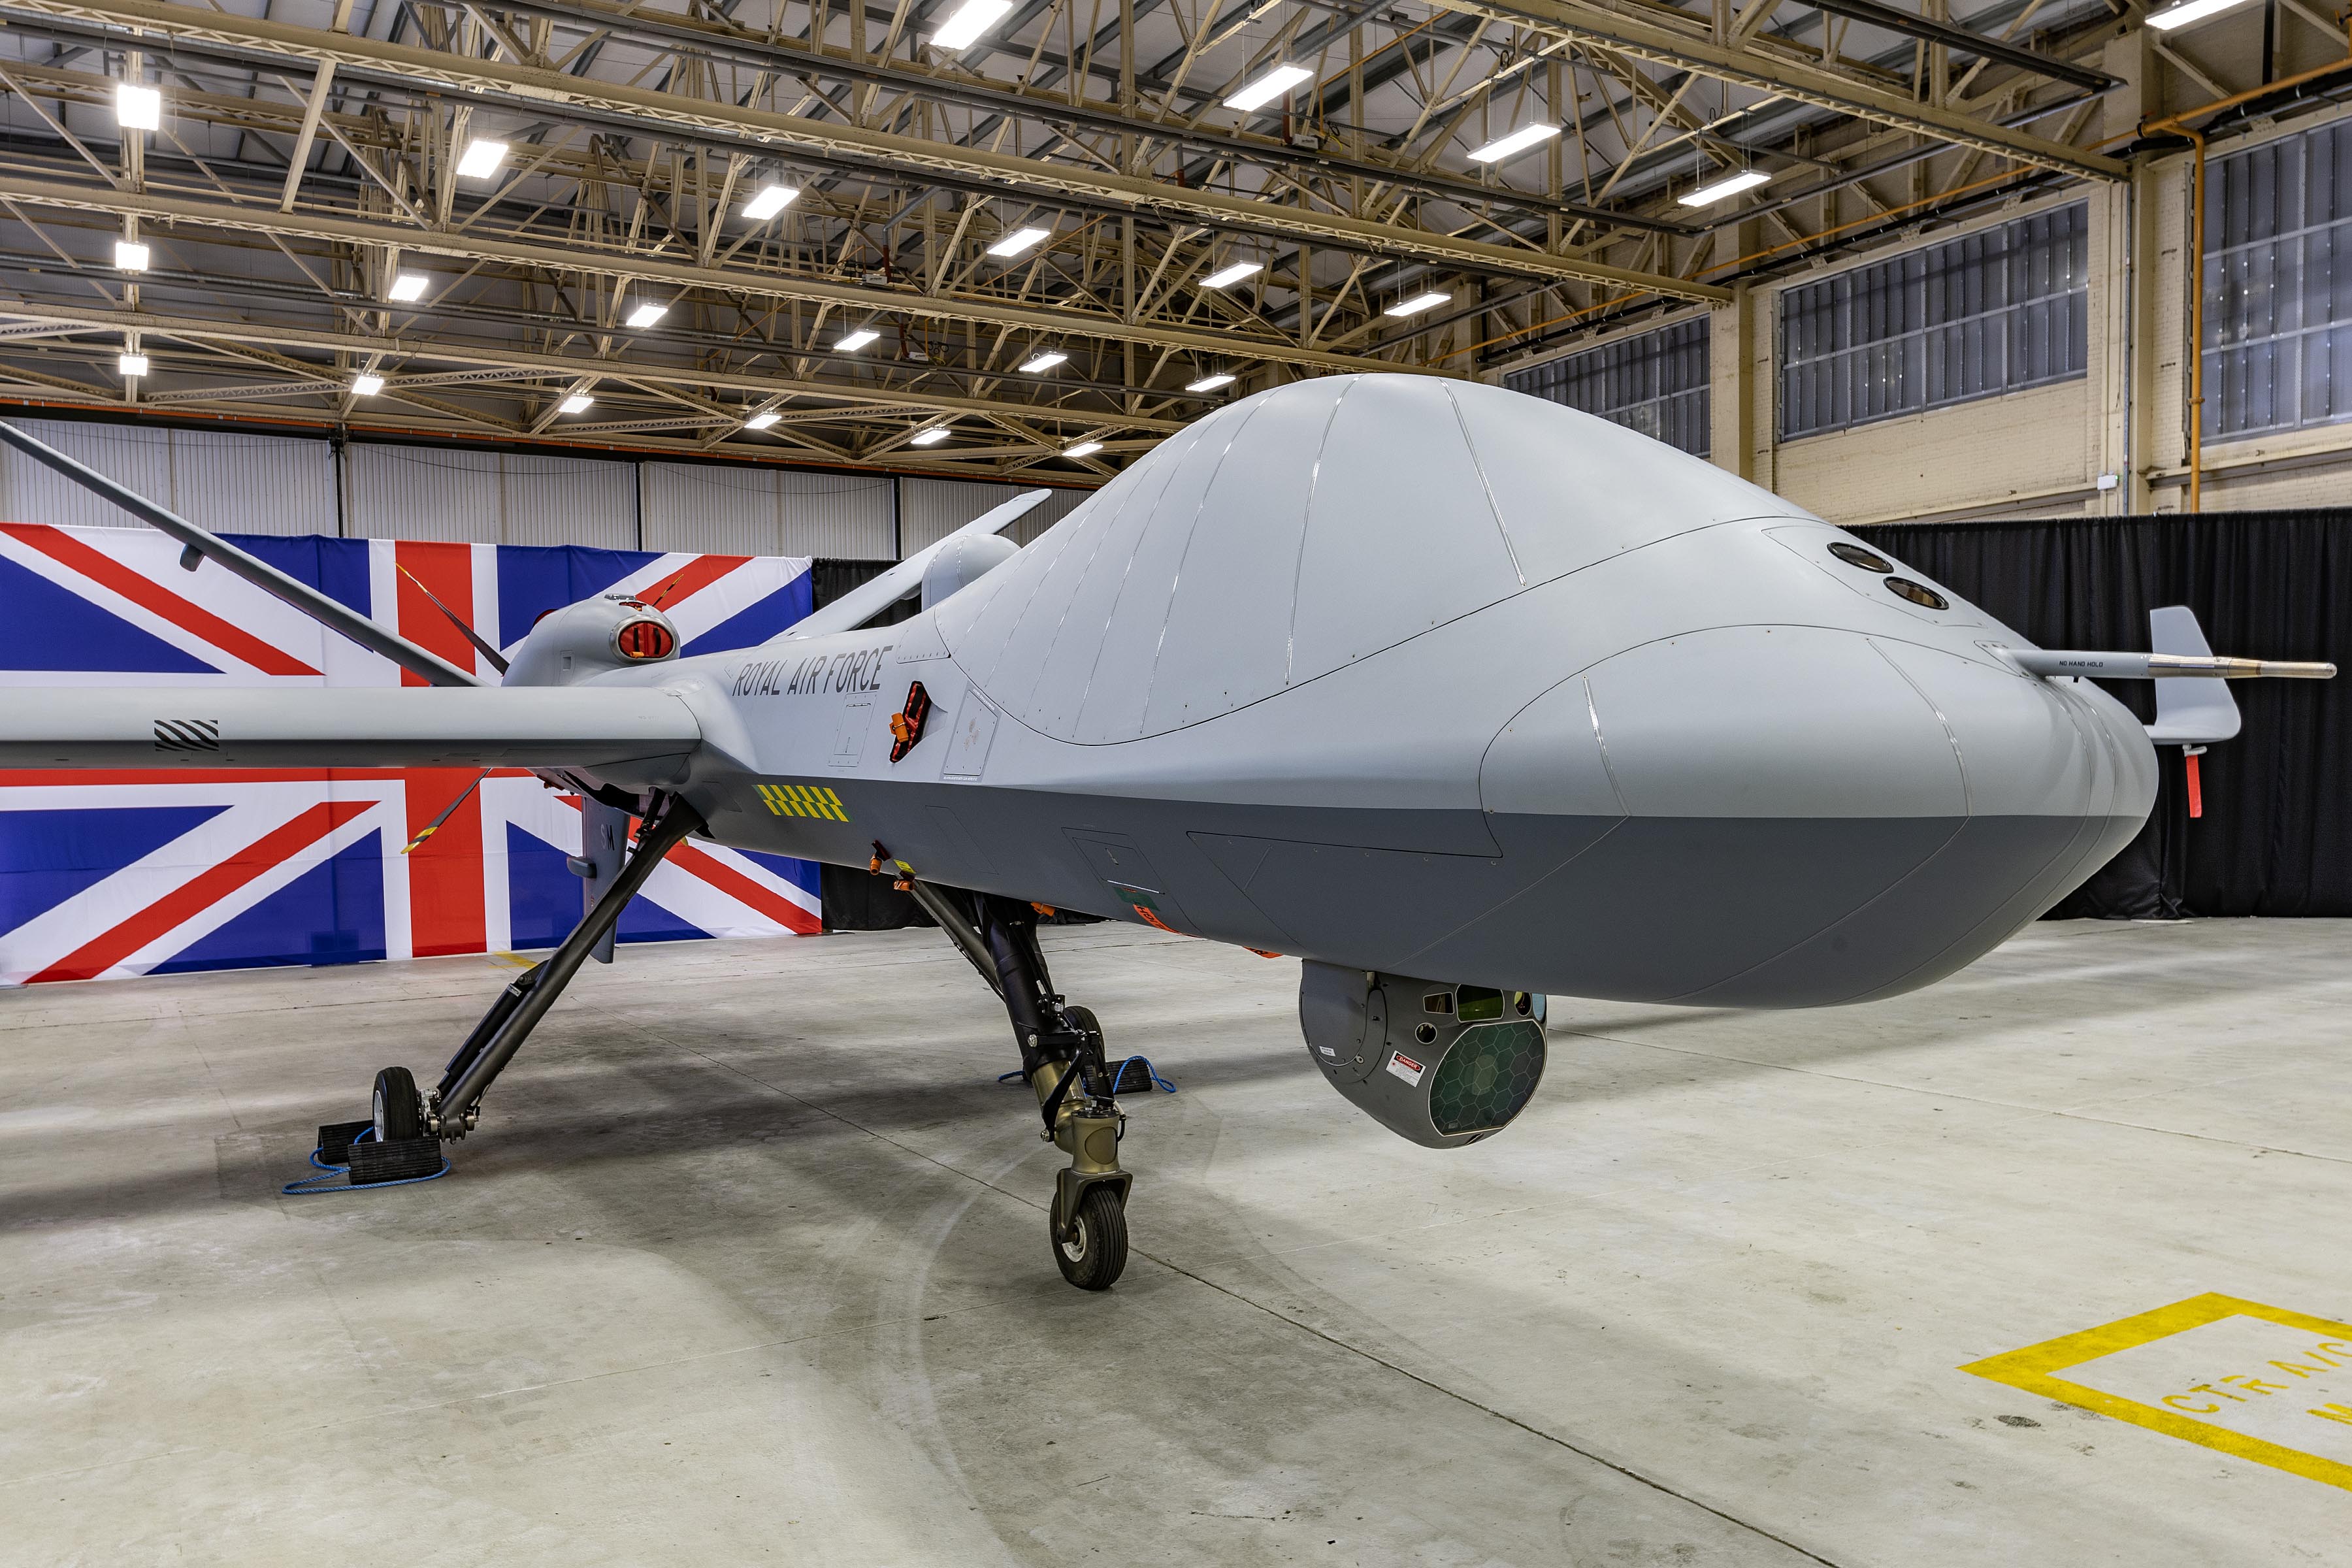 The UK Royal Air Force has received the first US Protector RG Mk1 strike and reconnaissance drone